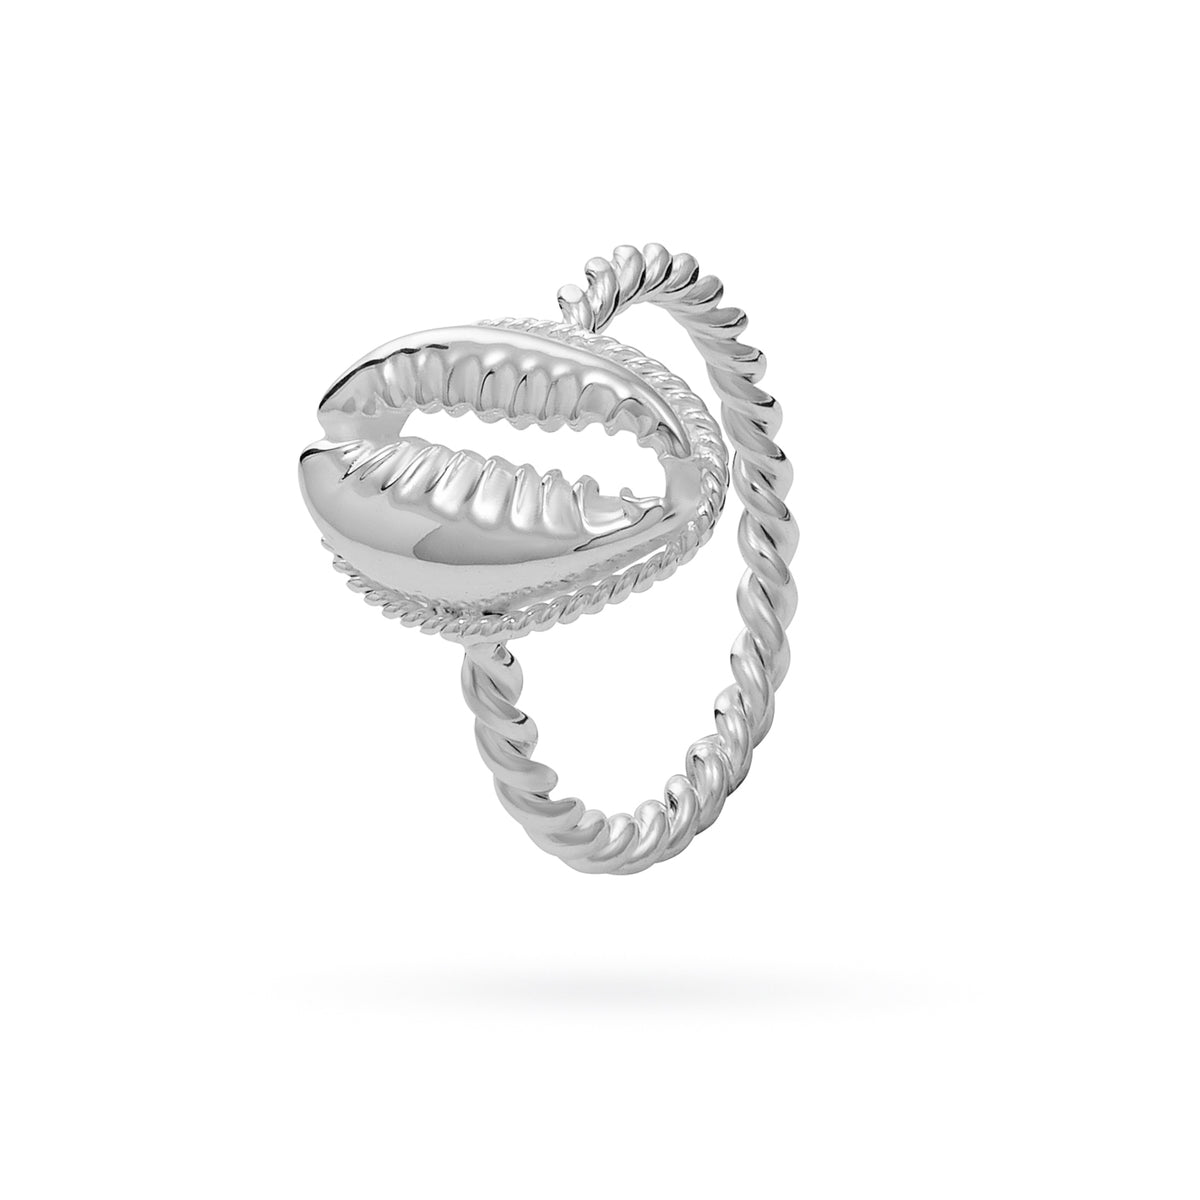 COWRIE SHELL RING